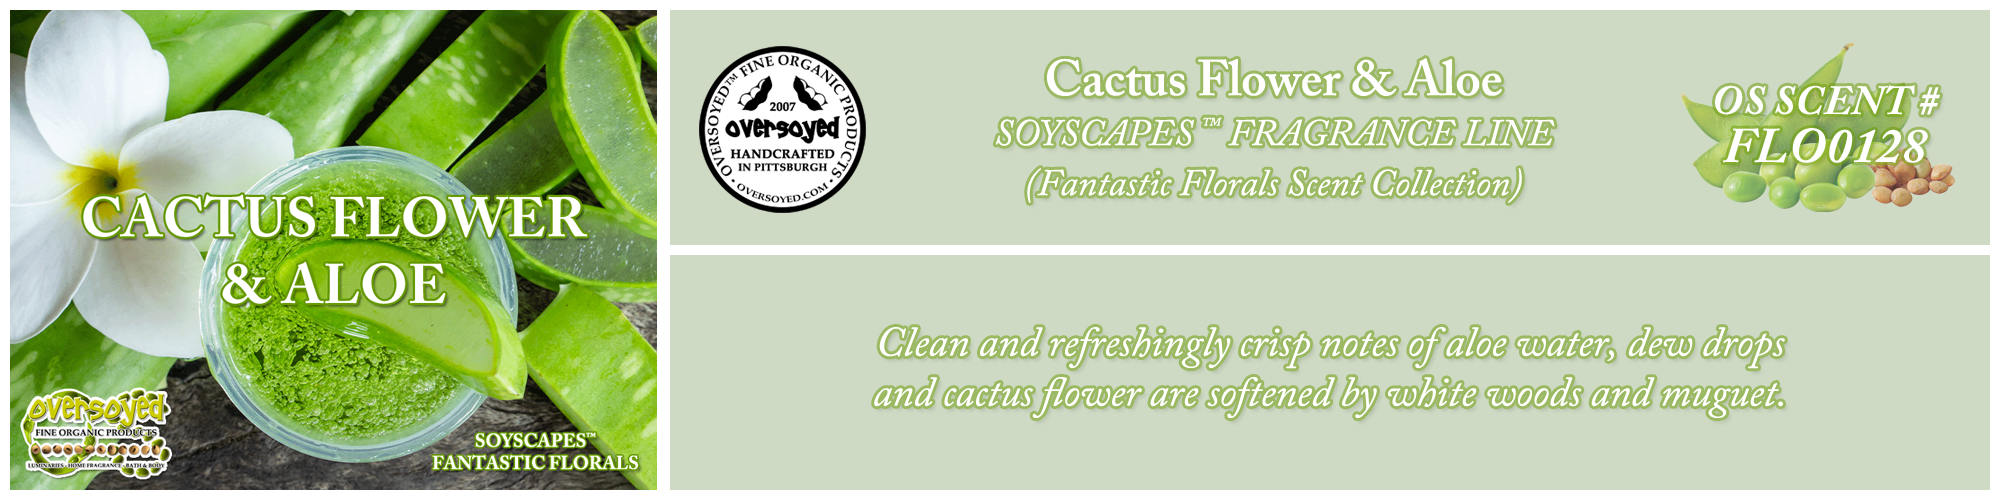 Cactus Flower & Aloe Handcrafted Products Collection